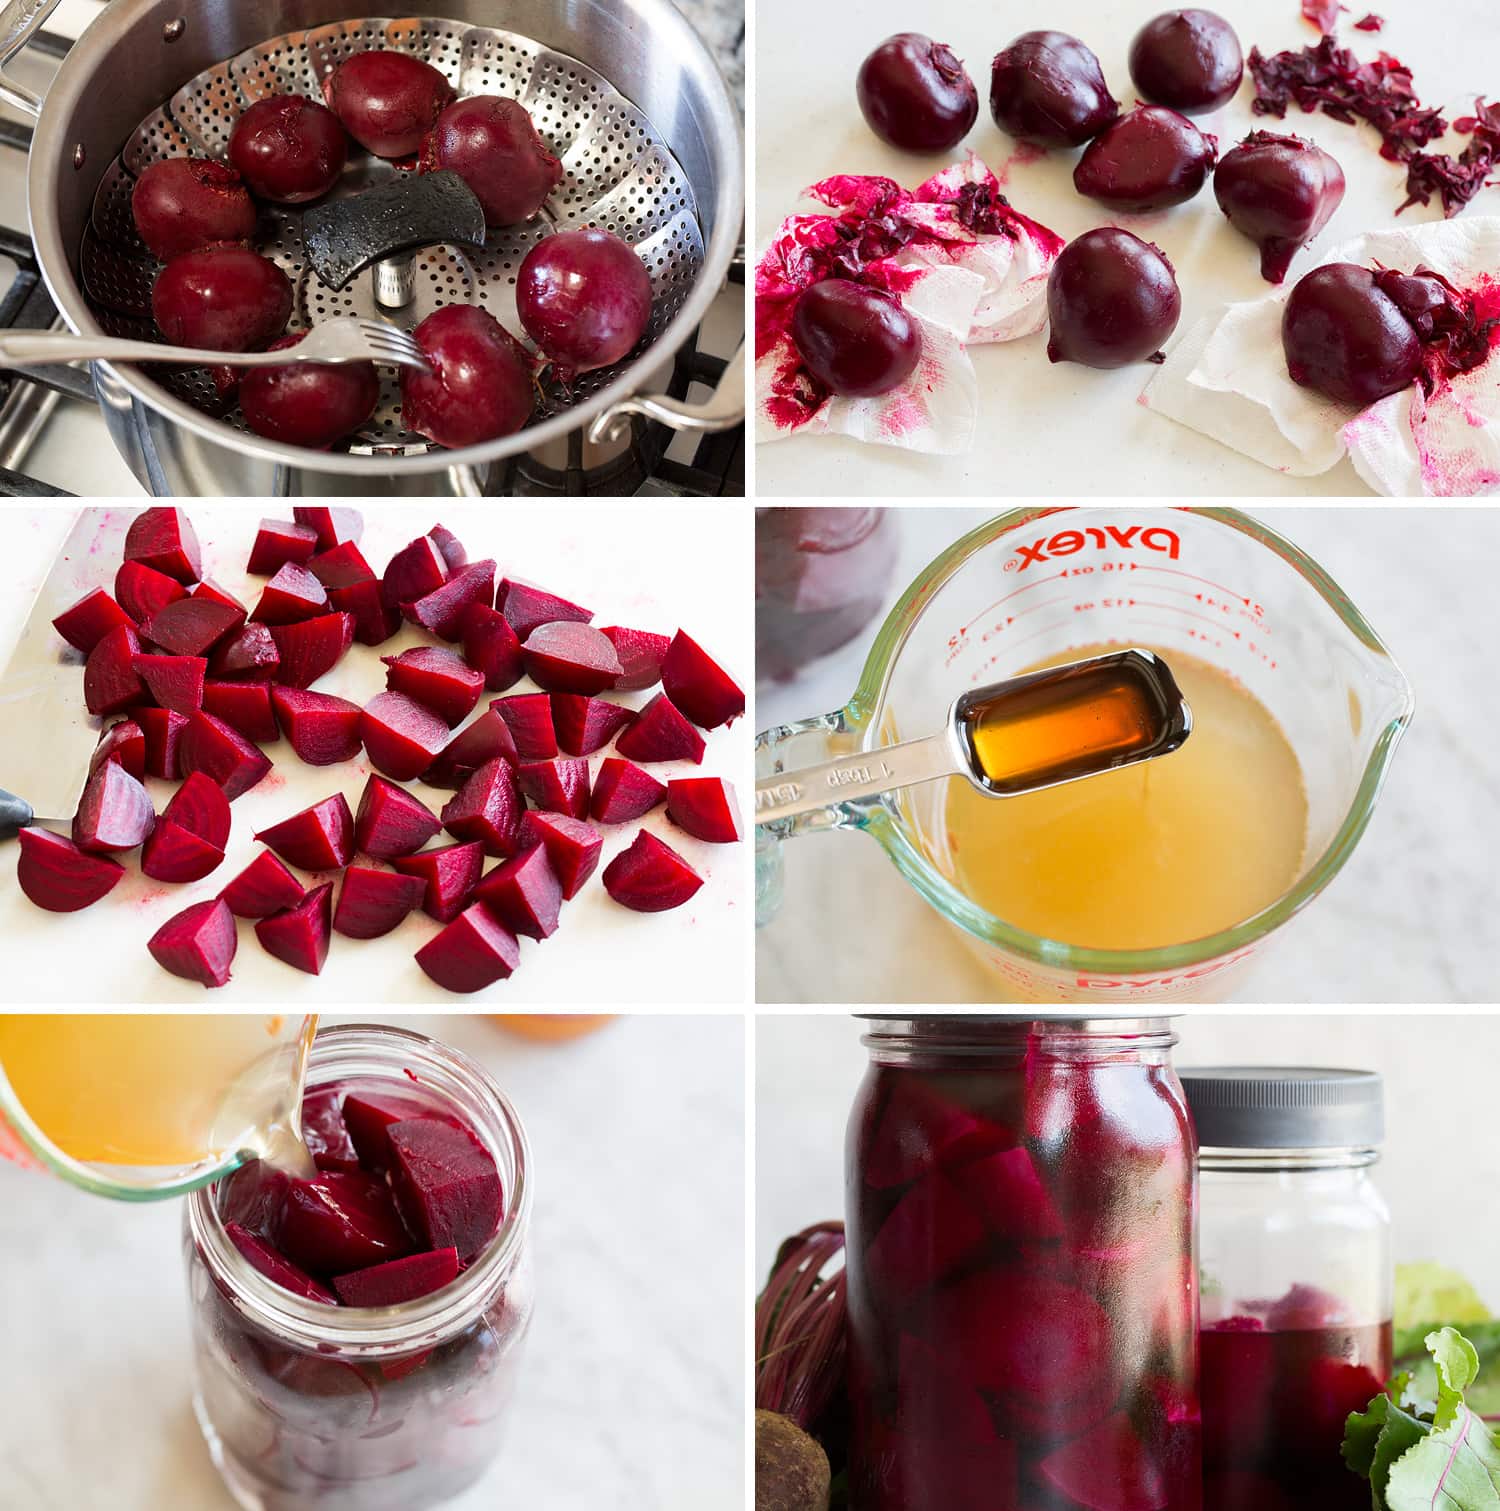 Steps showing how to make pickled beets.